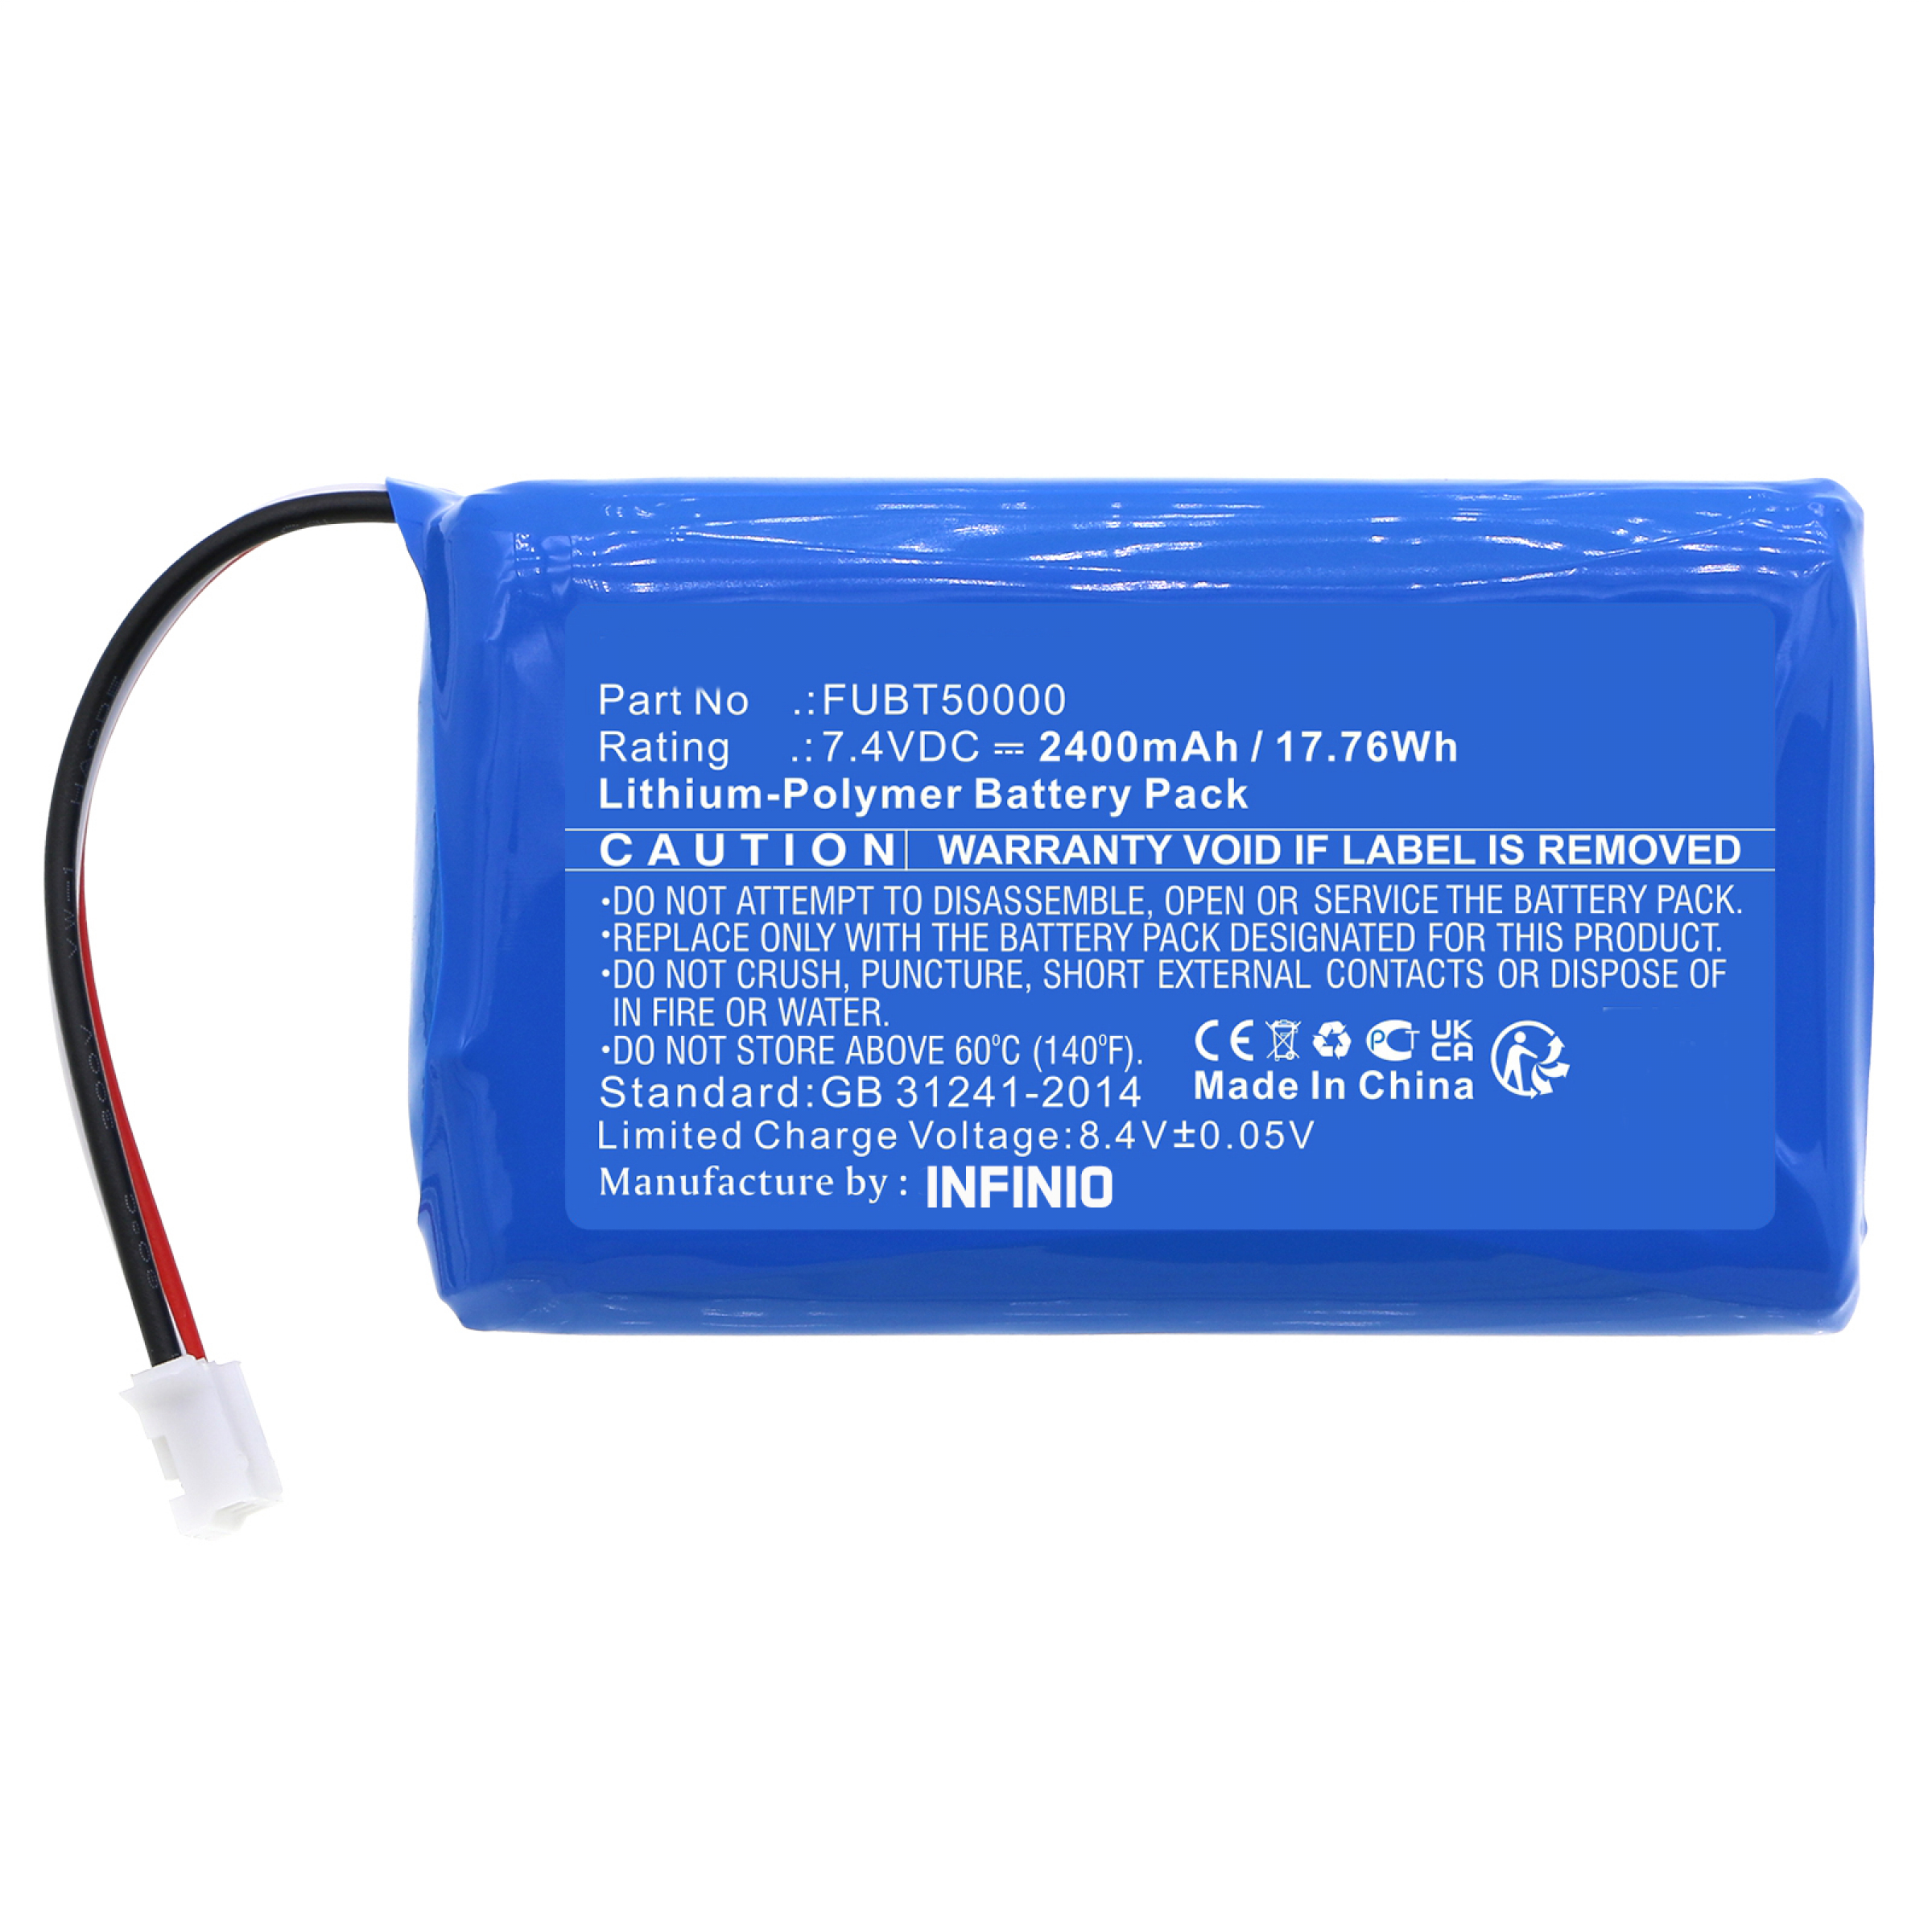 Infinio replacement battery for ABUS FUBT50000 replacement battery Secvest central wireless alarm system